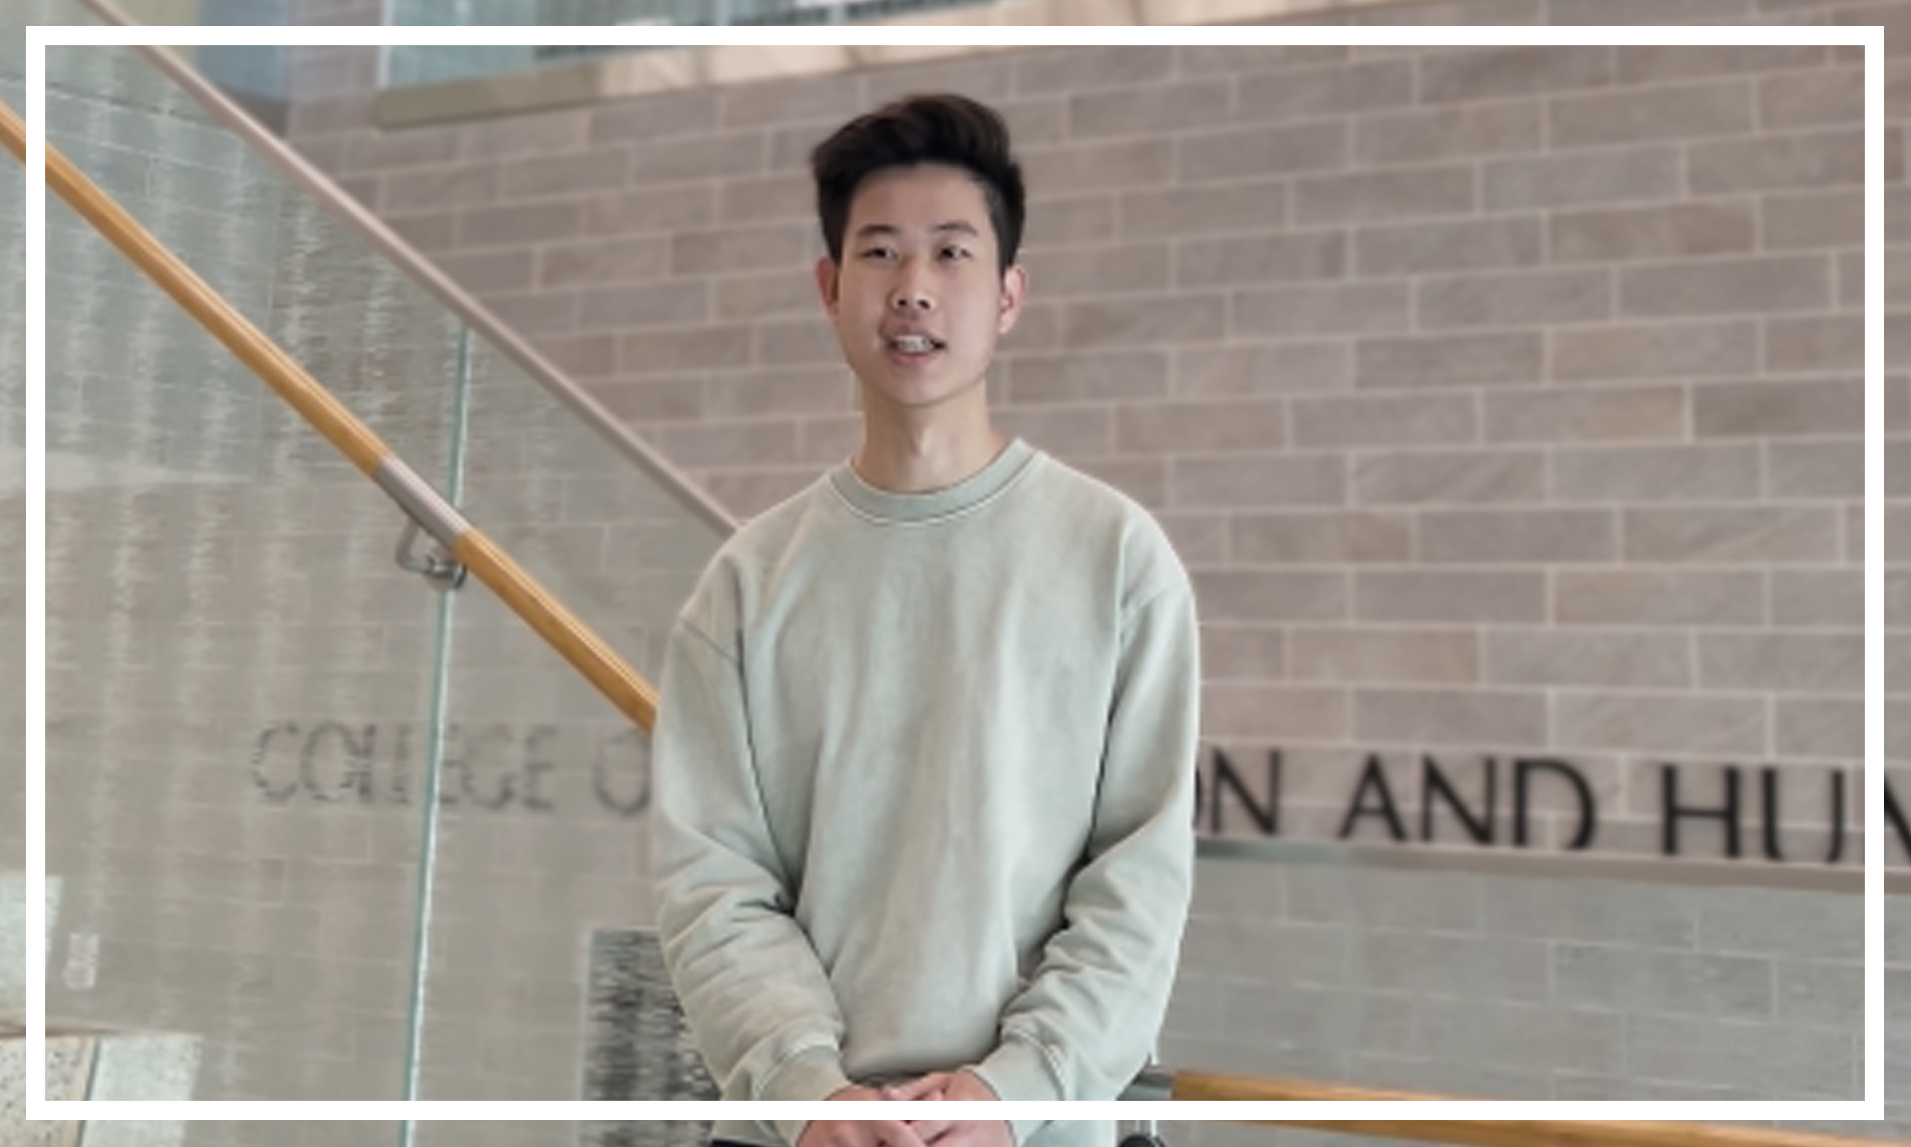 Which major can get you an internship with a pay of $3,000/month? An Insight from Timothy Gunawan